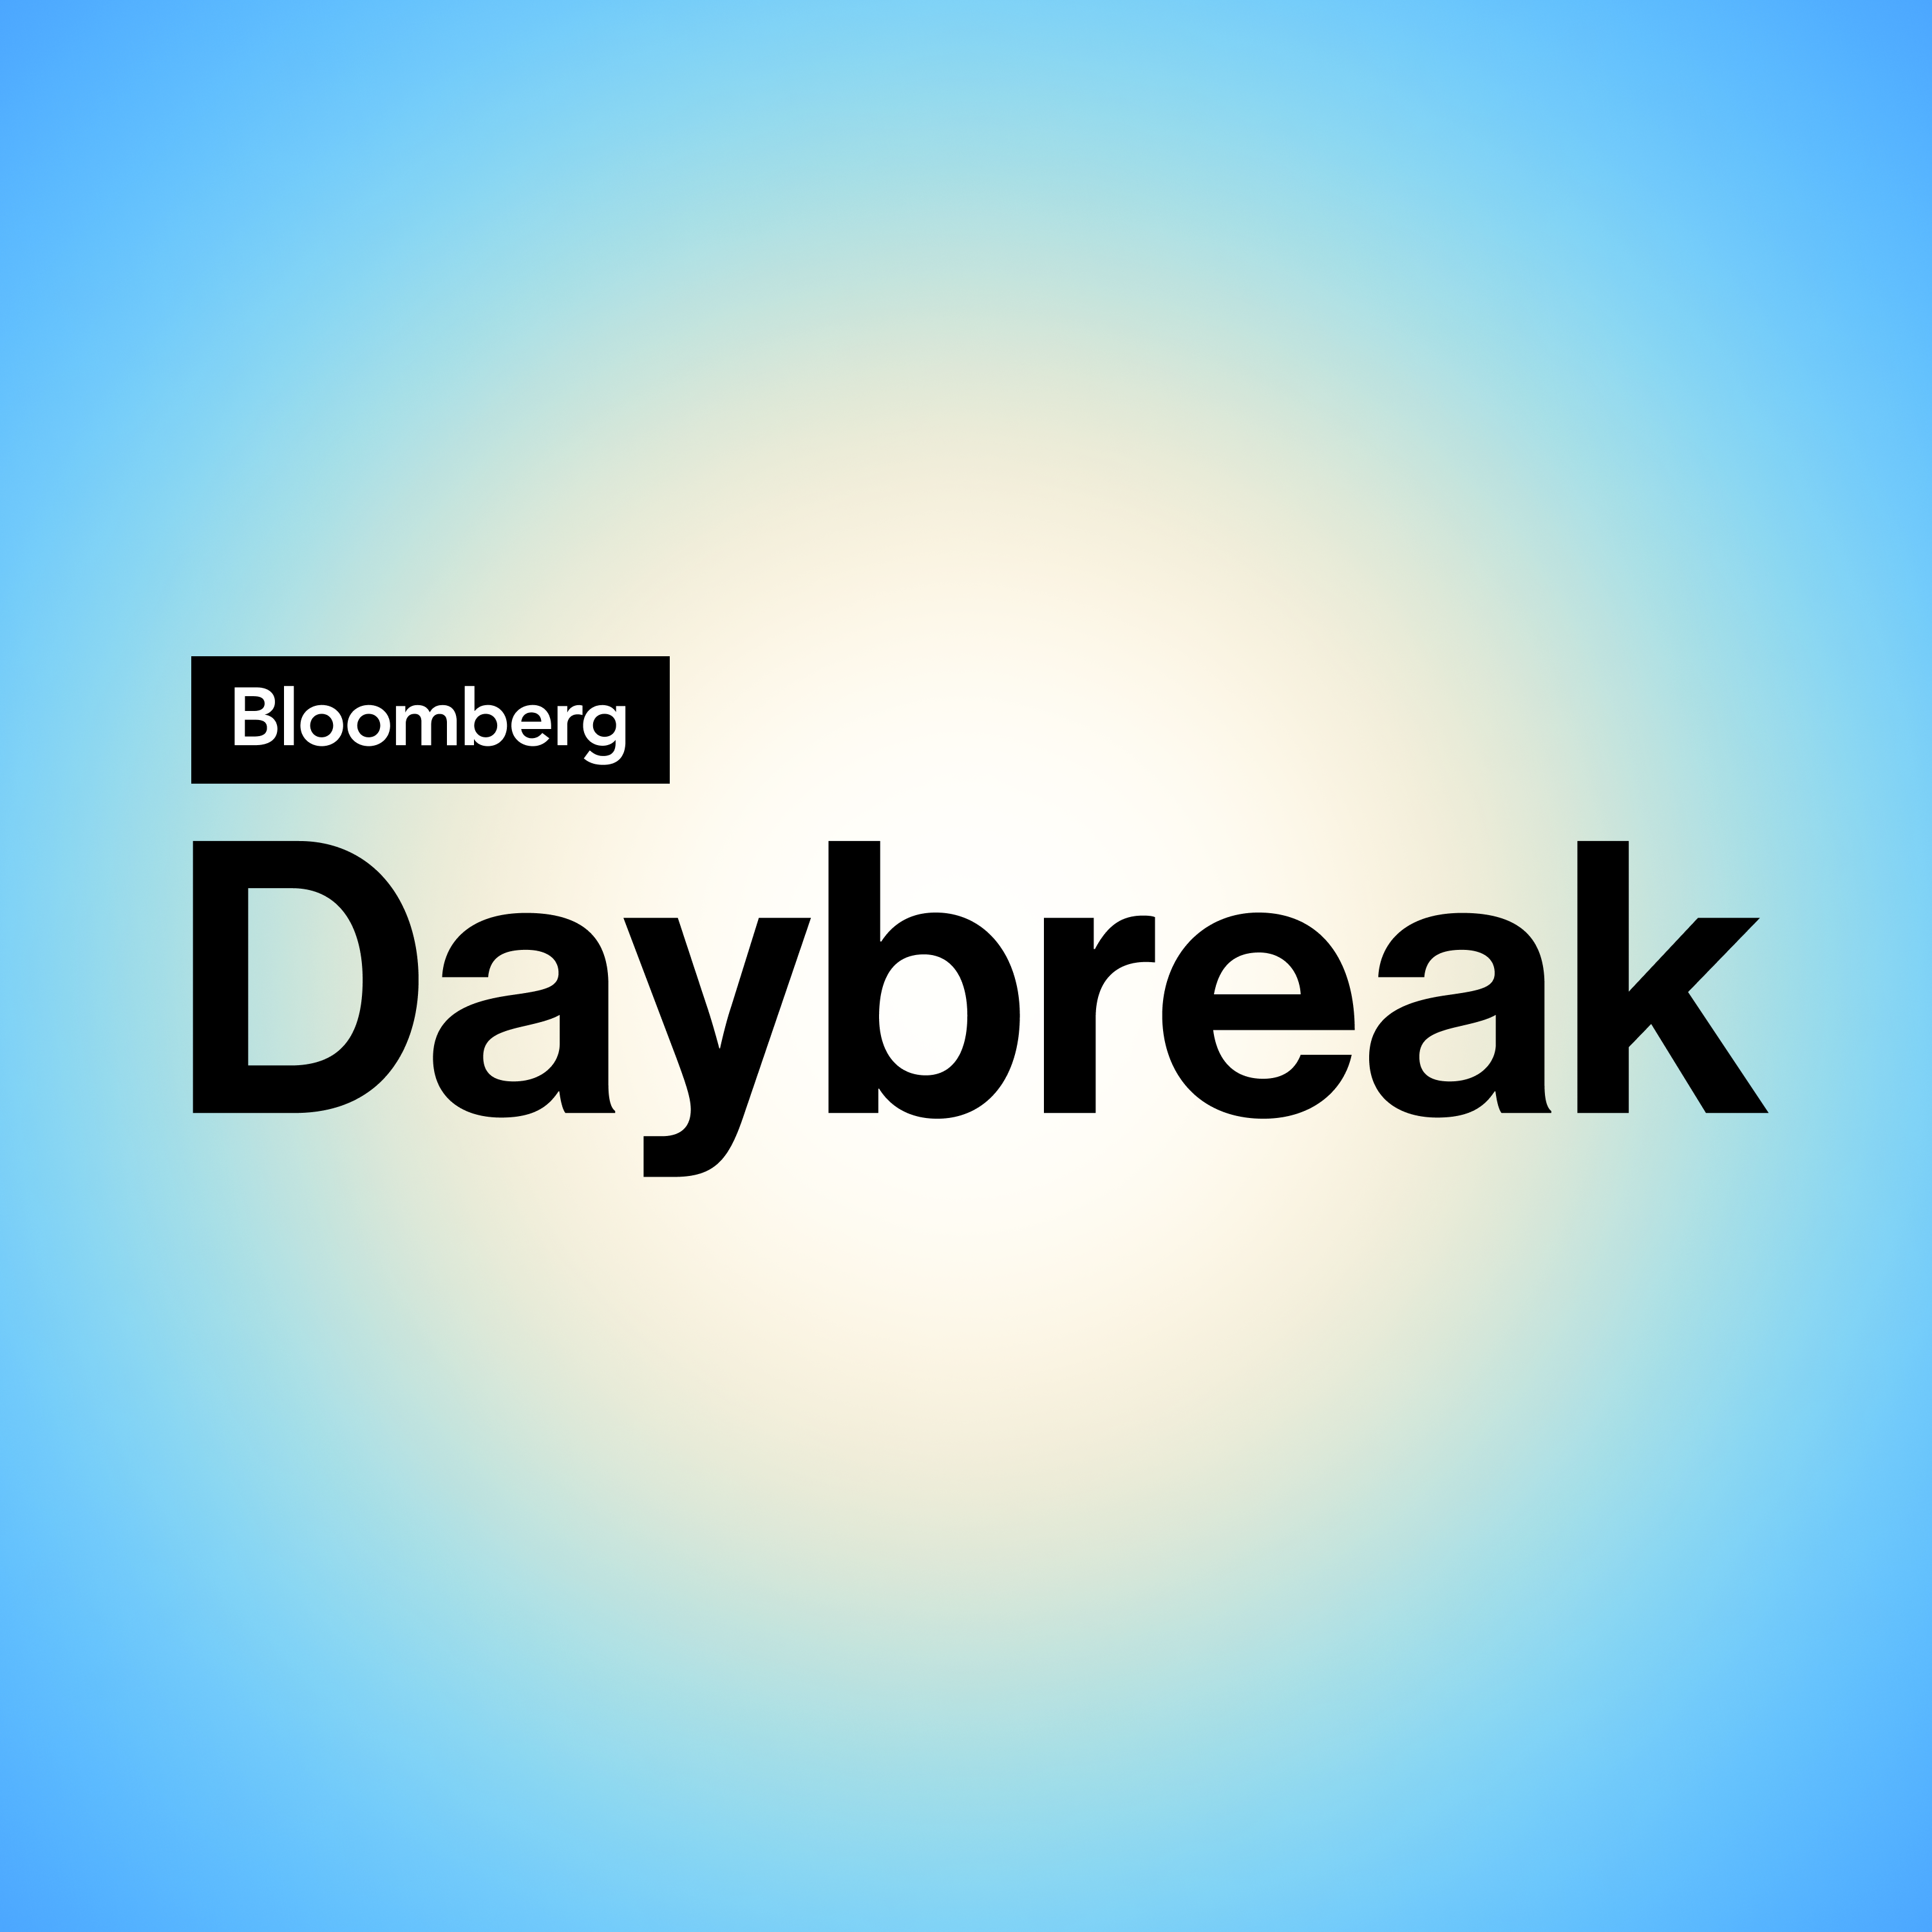 Daybreak Weekend: U.S Inflation Data, Europe Chocolate Prices, BYD Preview